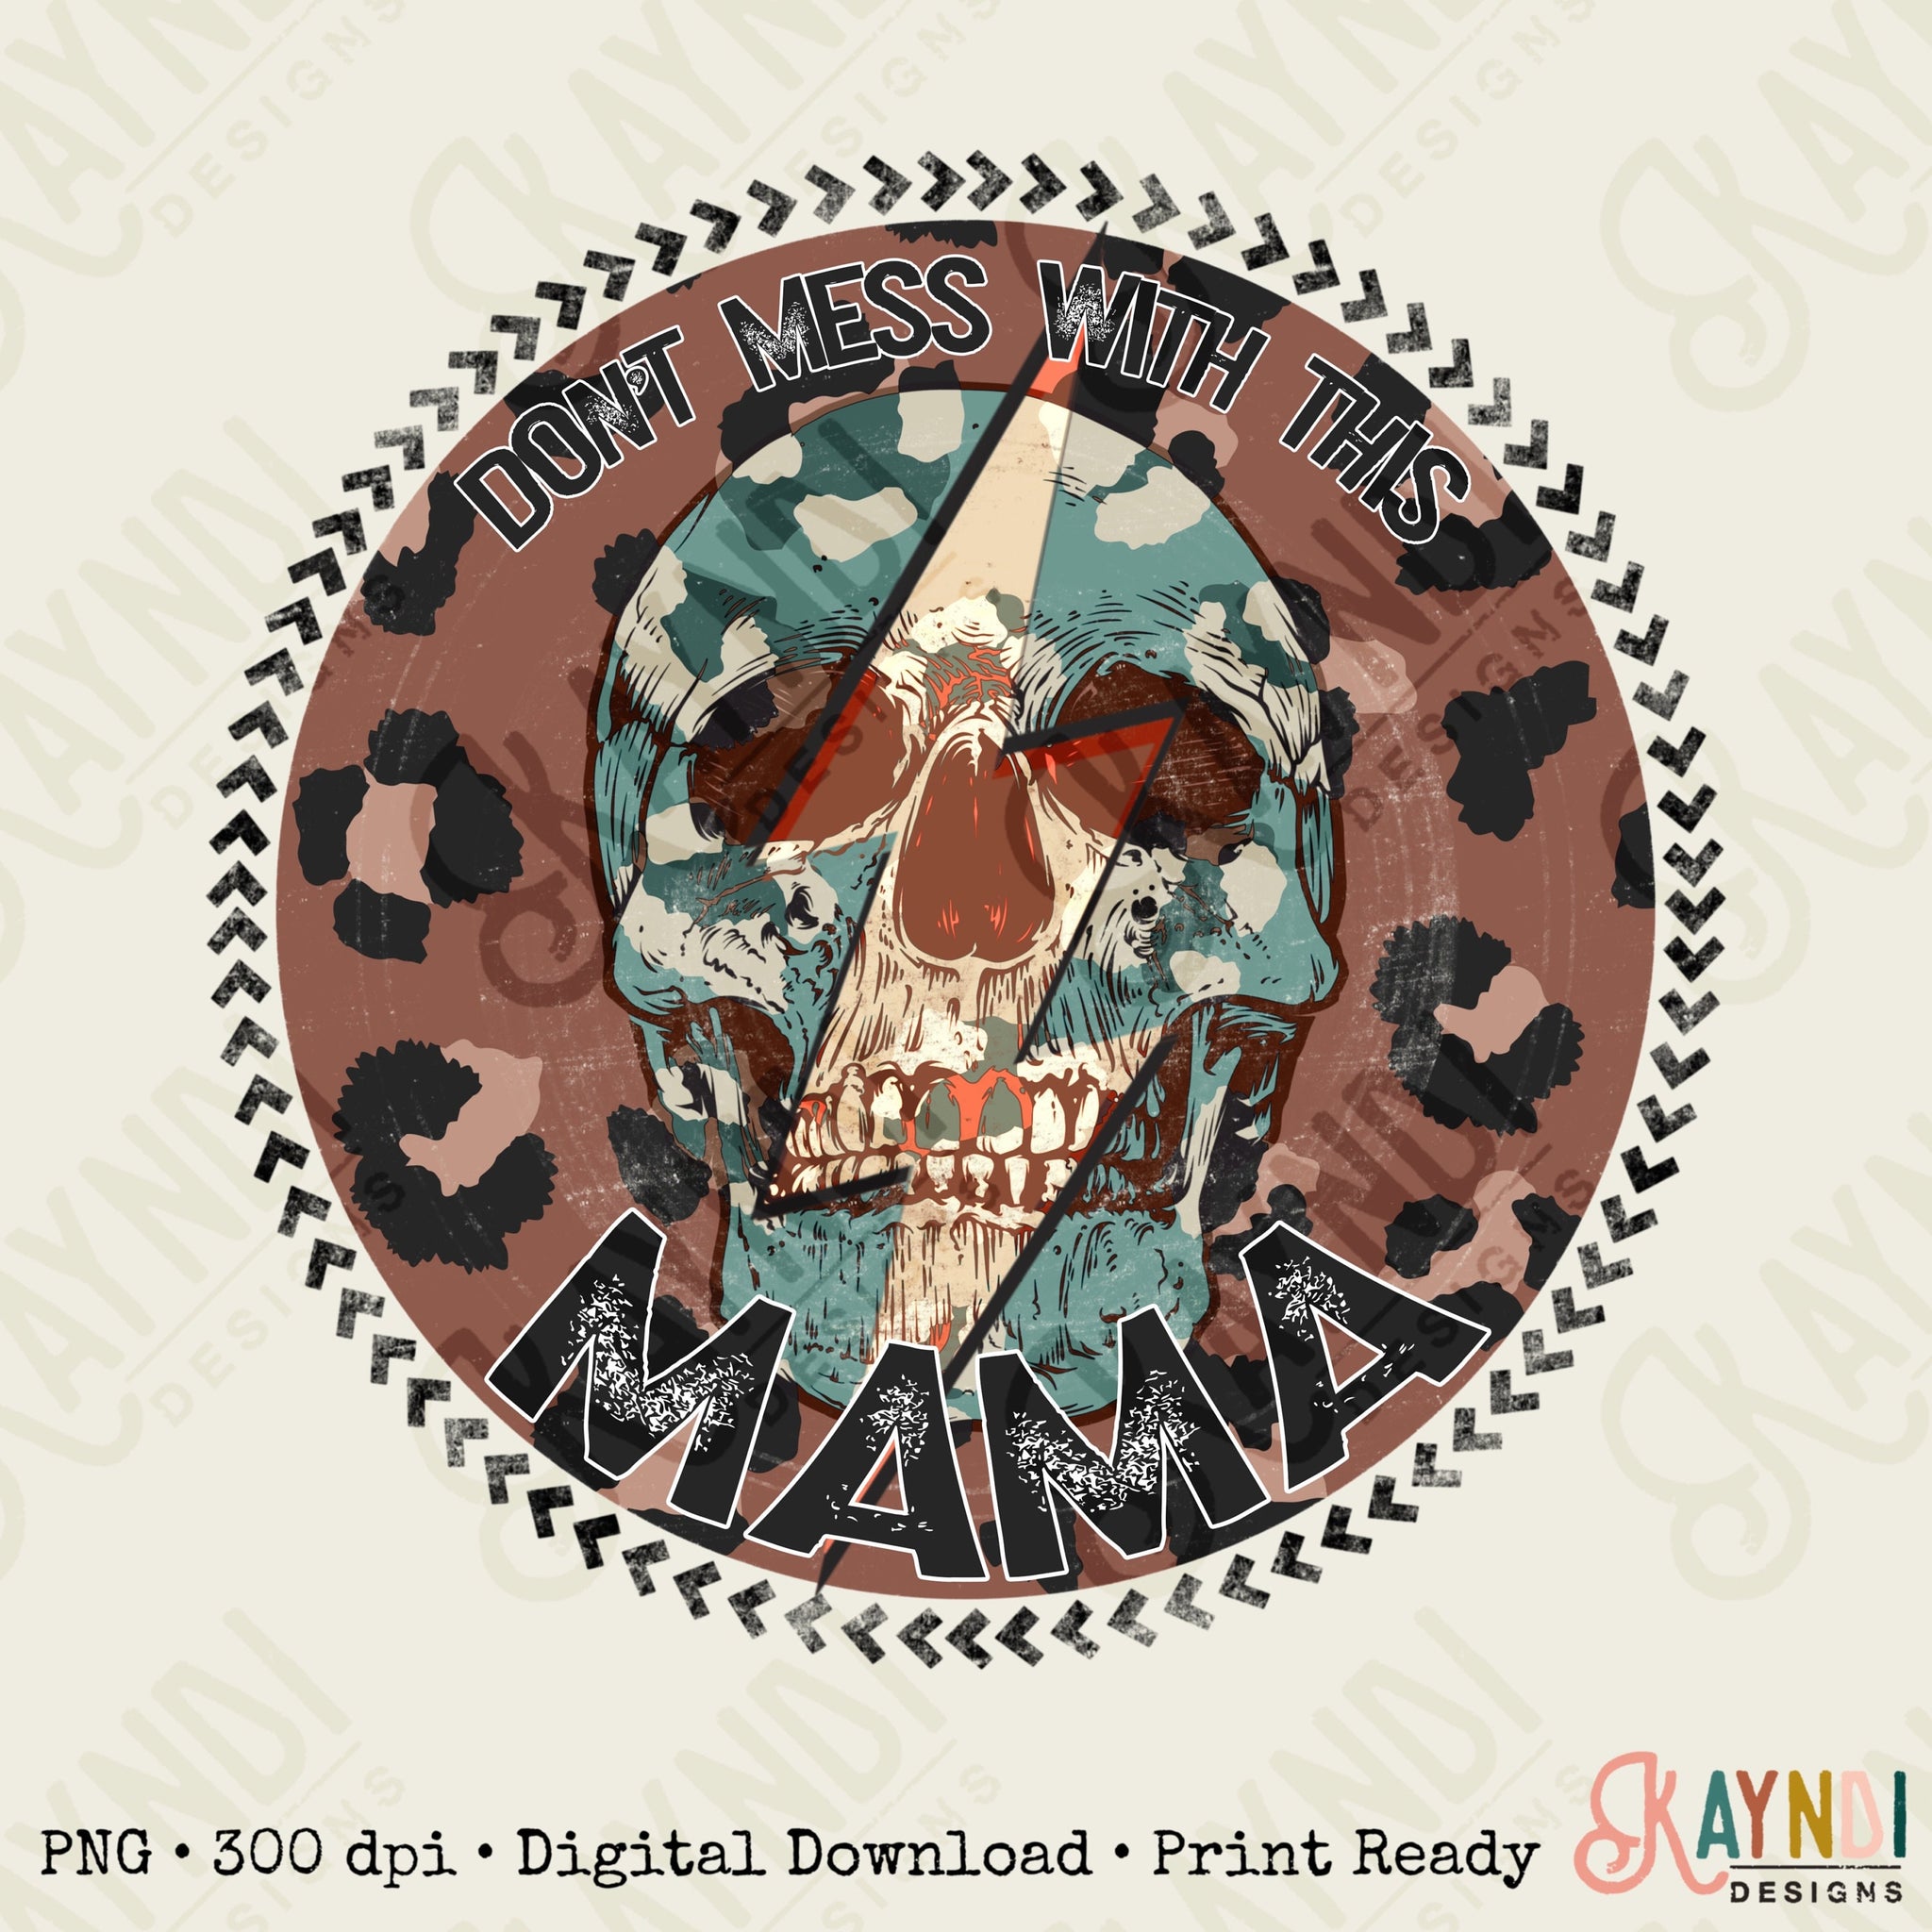 Don't Mess With This Mama Skull Sublimation Design PNG Digital Download Printable Leopard Lighting Bolt Skeleton Retro Rock Band Momma